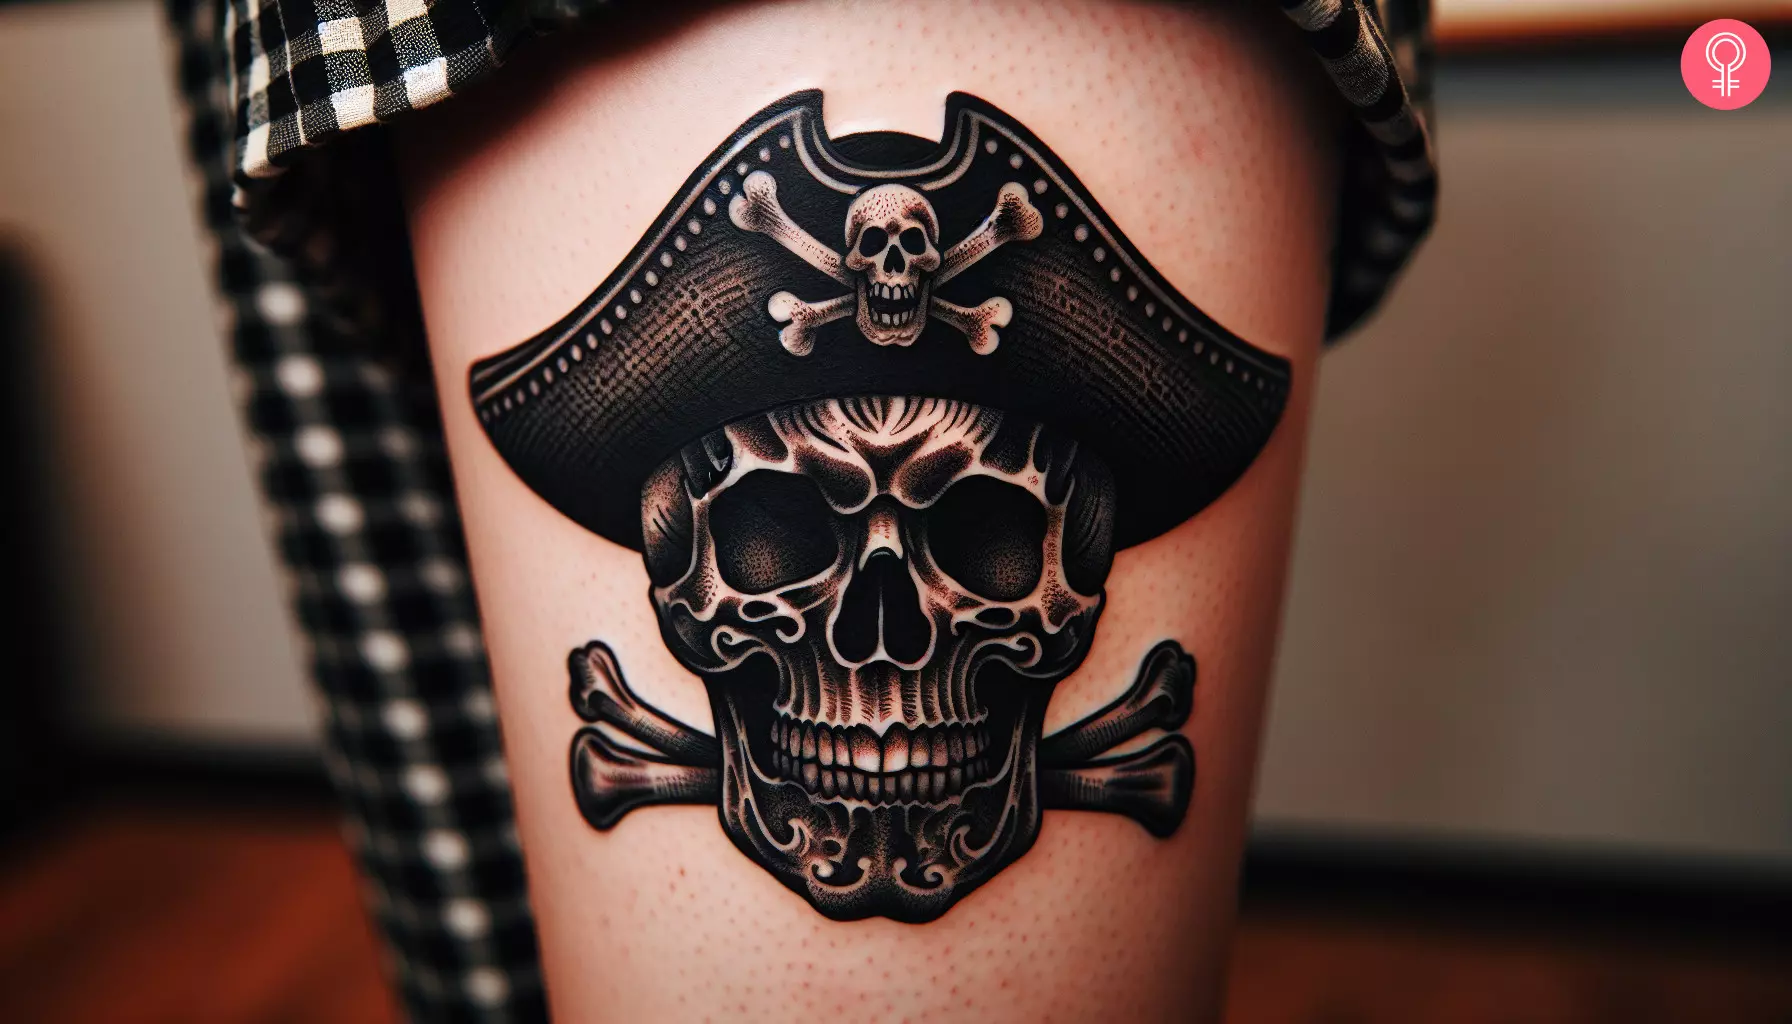 Woman with pirate skull tattoo on her thigh